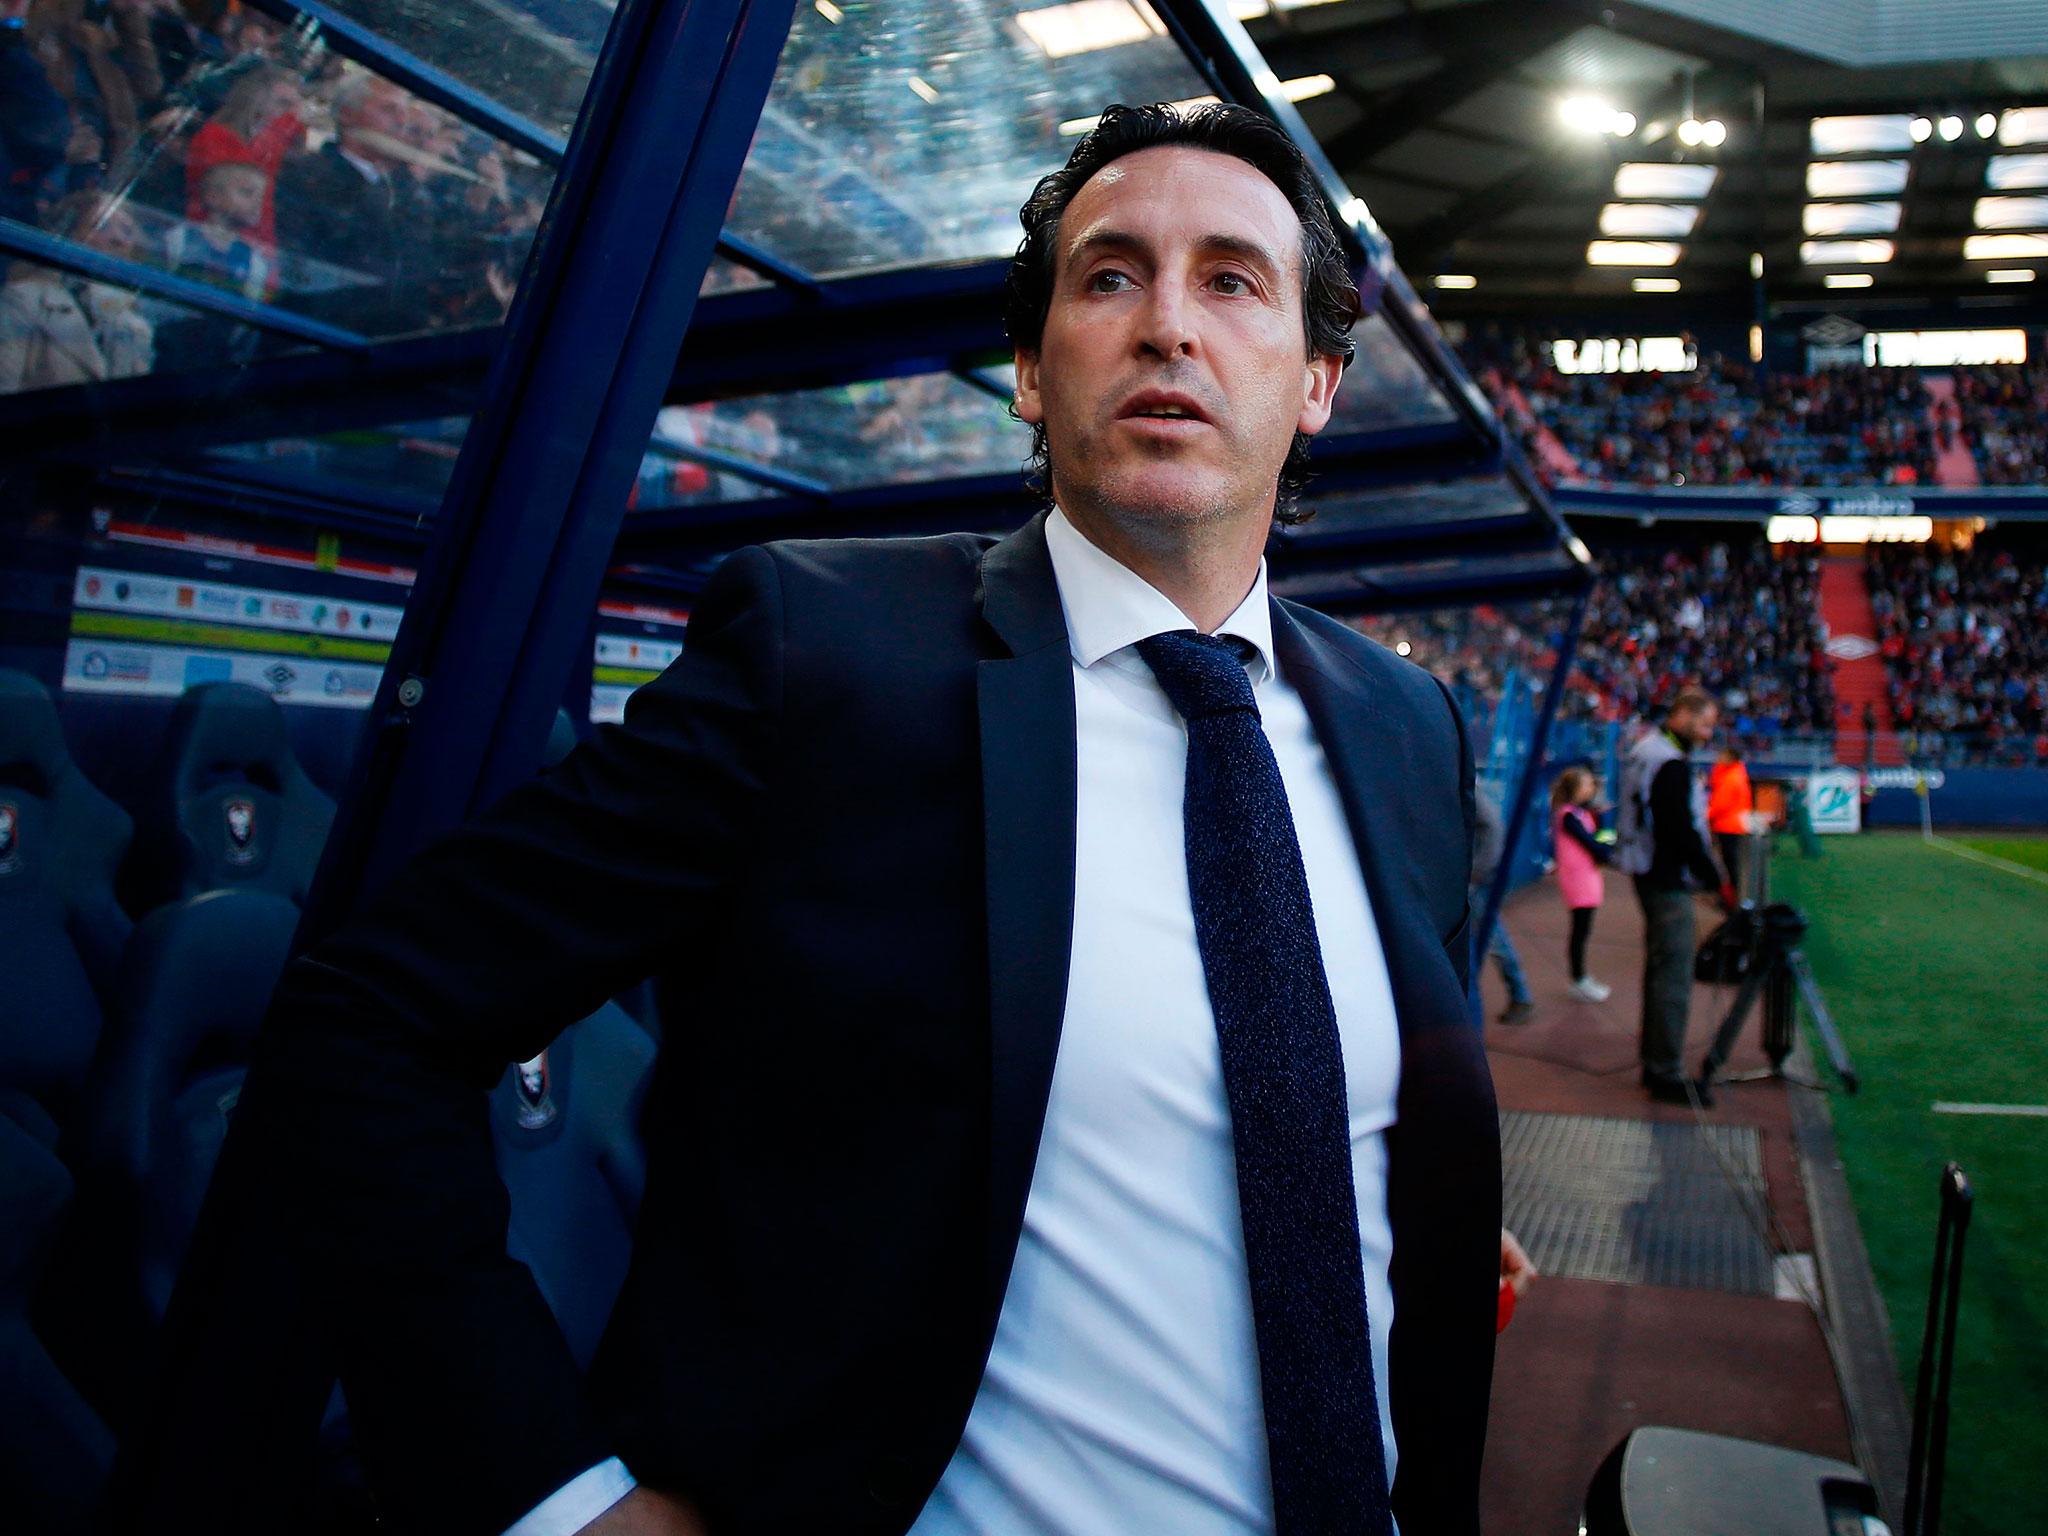 Transfer news, rumours - LIVE: Unai Emery to Arsenal latest plus Liverpool, Manchester United, Spurs and more